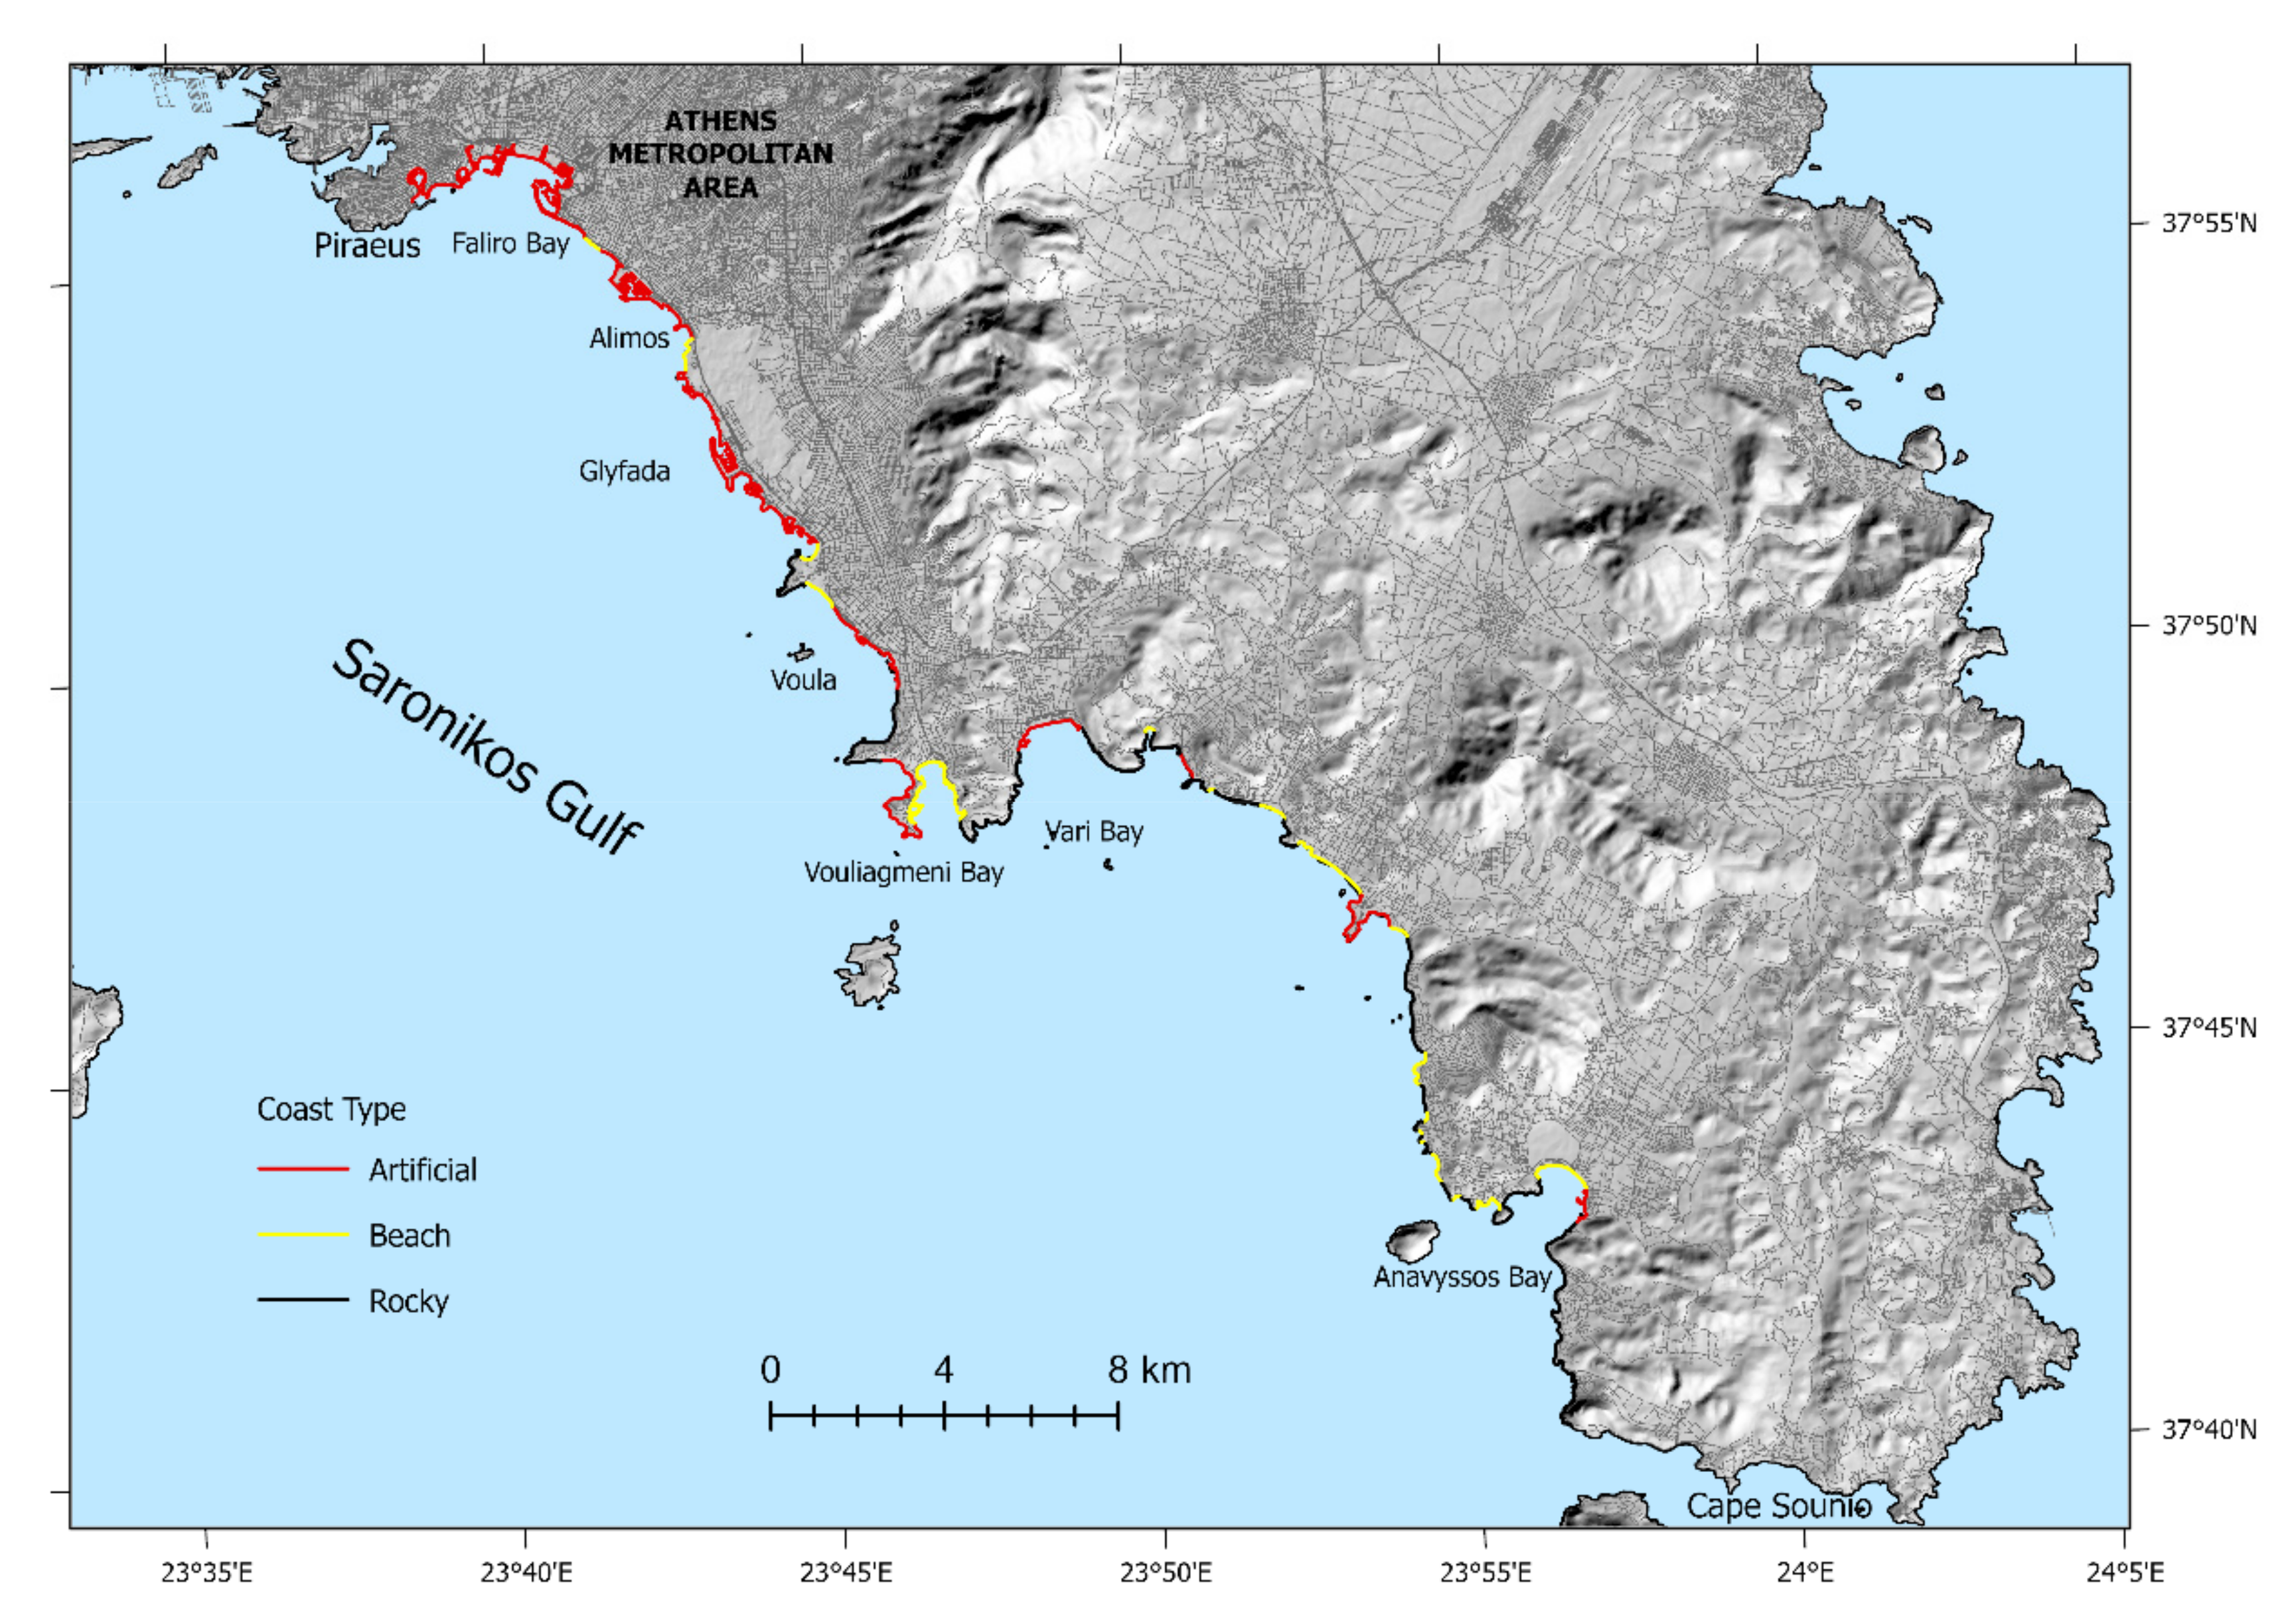 Water | Free Full-Text | Mapping of Coastline Changes in Athens Riviera  over the Past 76 Year's Measurements